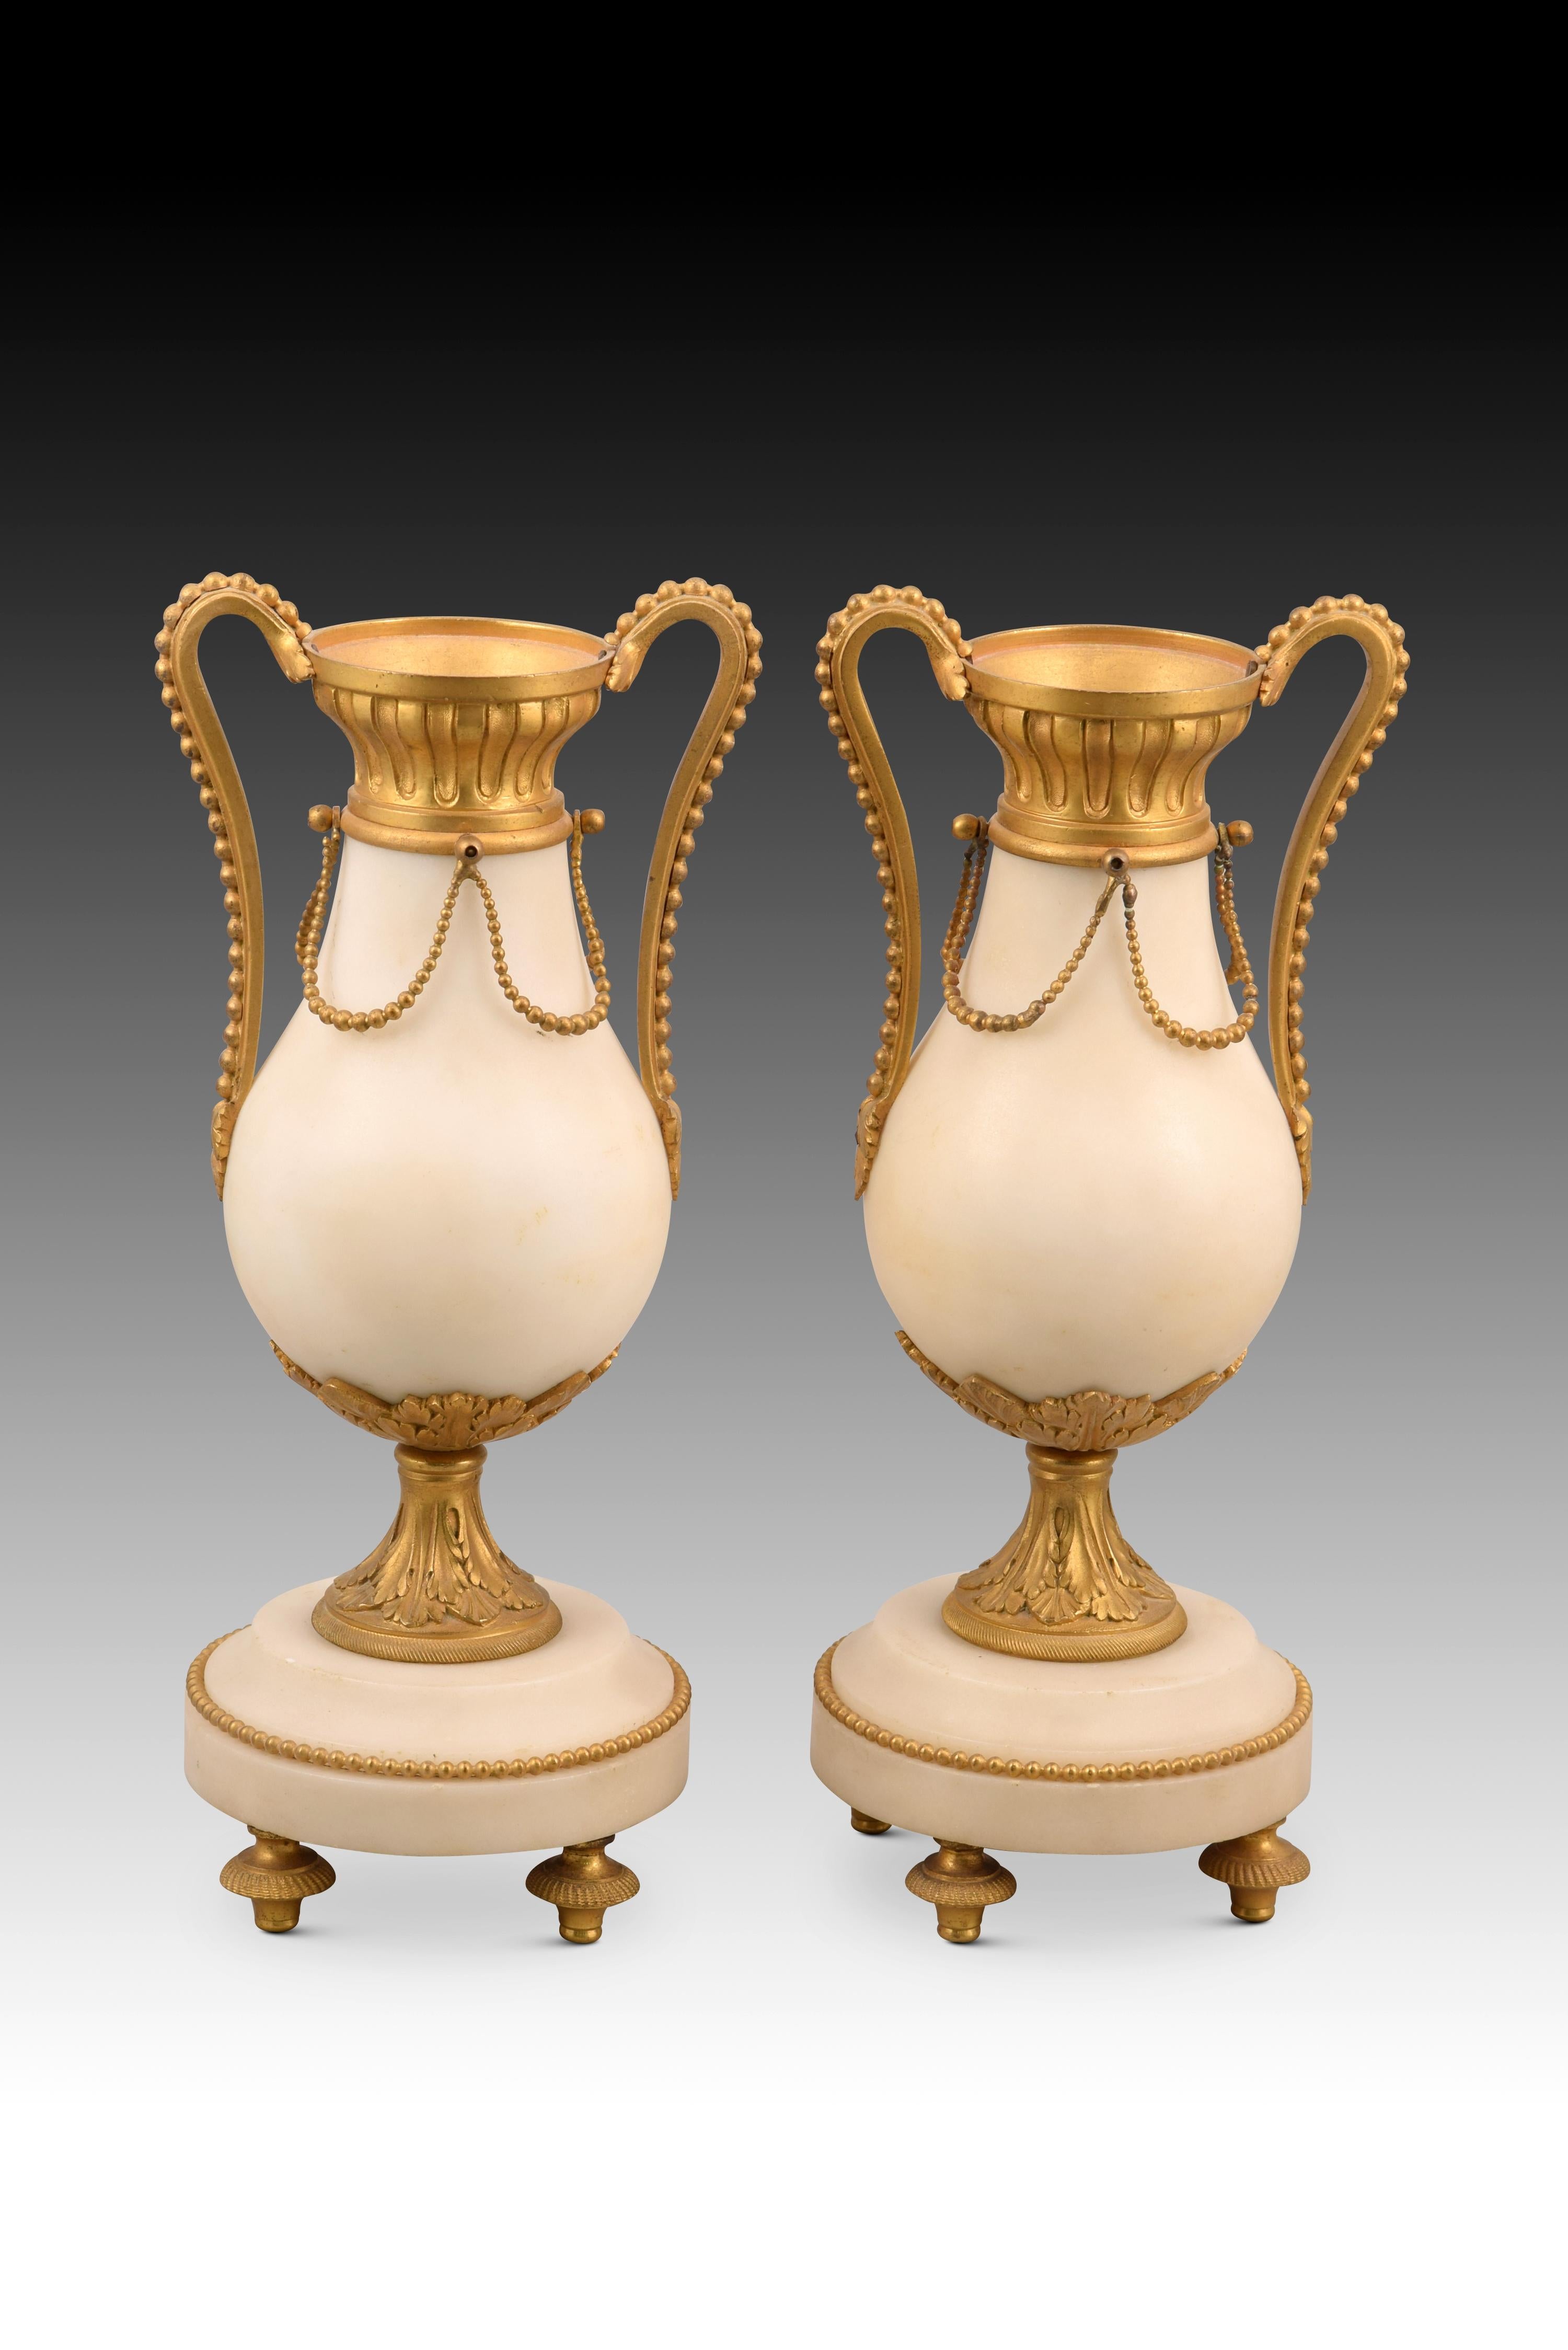 Pair of vases. Bronze, marble. XIX century.
 Pair of vases made of carved light marble with a stepped and circular base of the same material that also have decorative details in gilded bronze (strings of pearls, necks with architectural elements,